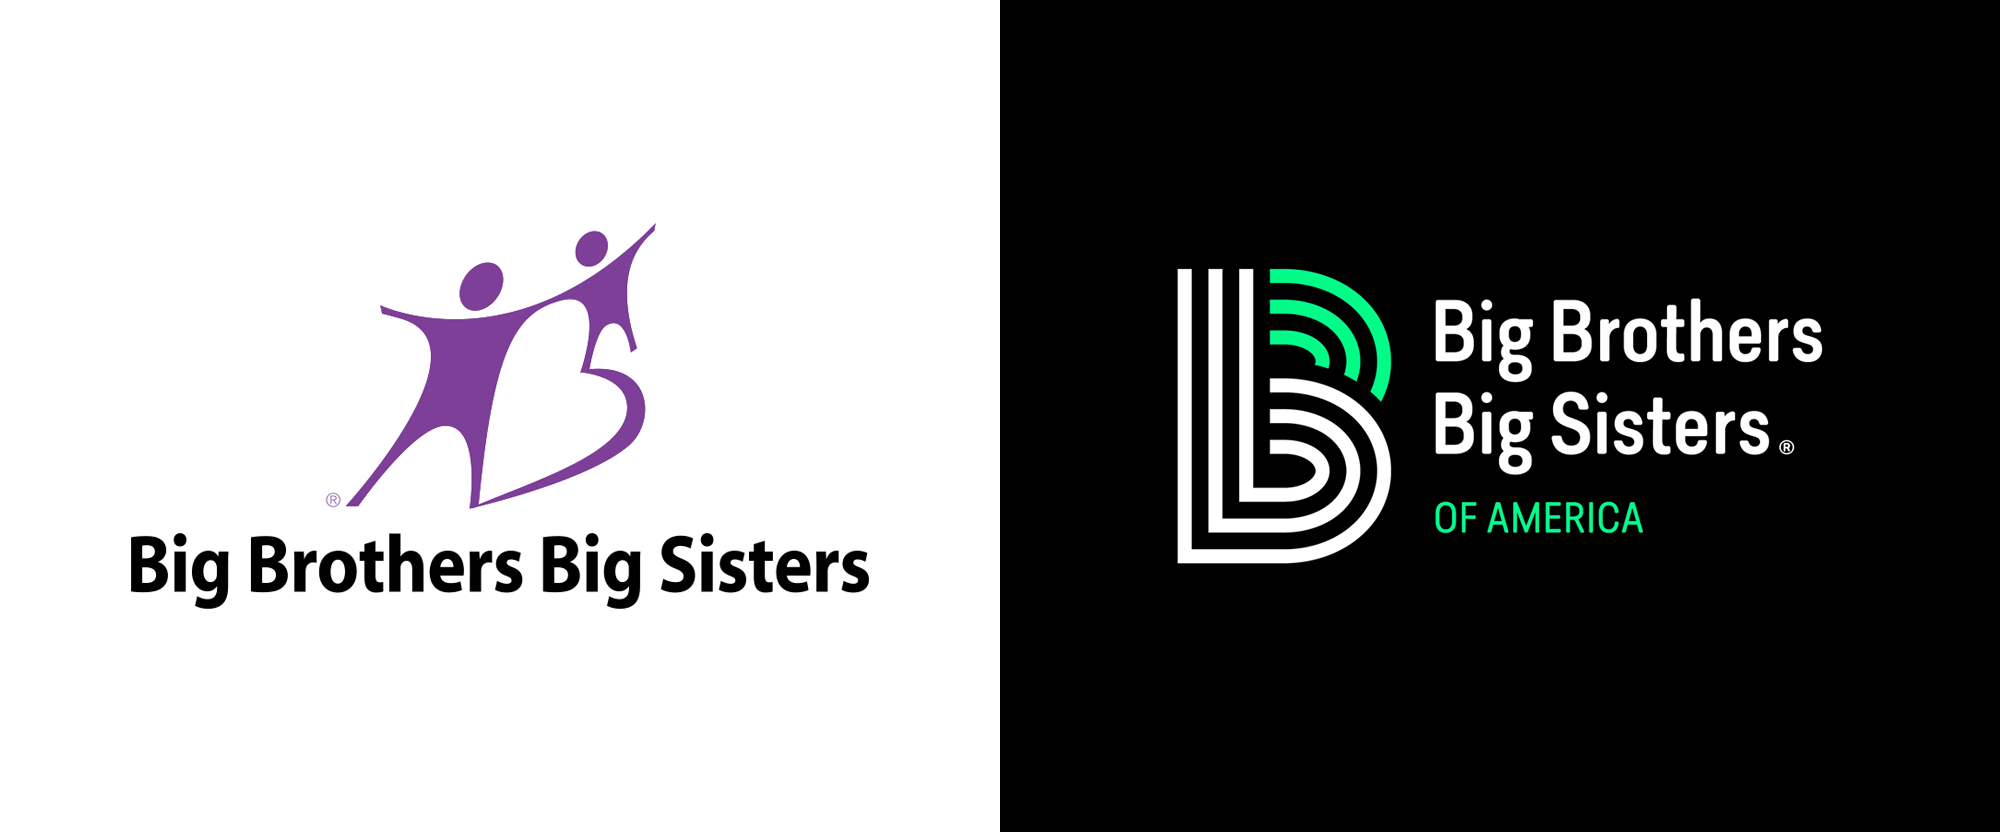 Big B Logo - Brand New: New Logo and Identity for Big Brothers Big Sisters